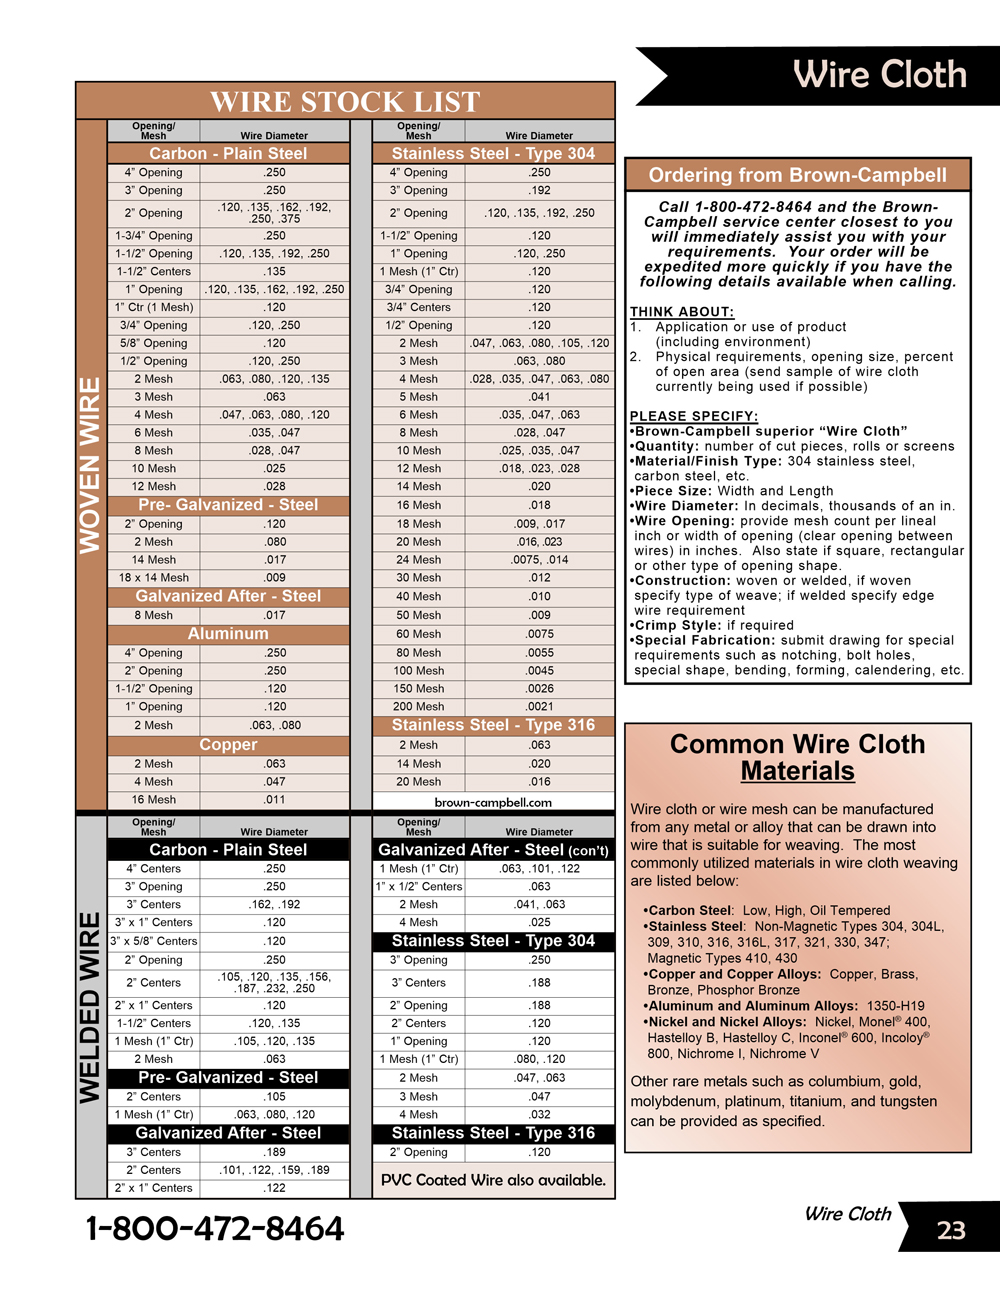 Brown-Campbell Master Catalog - Page 23